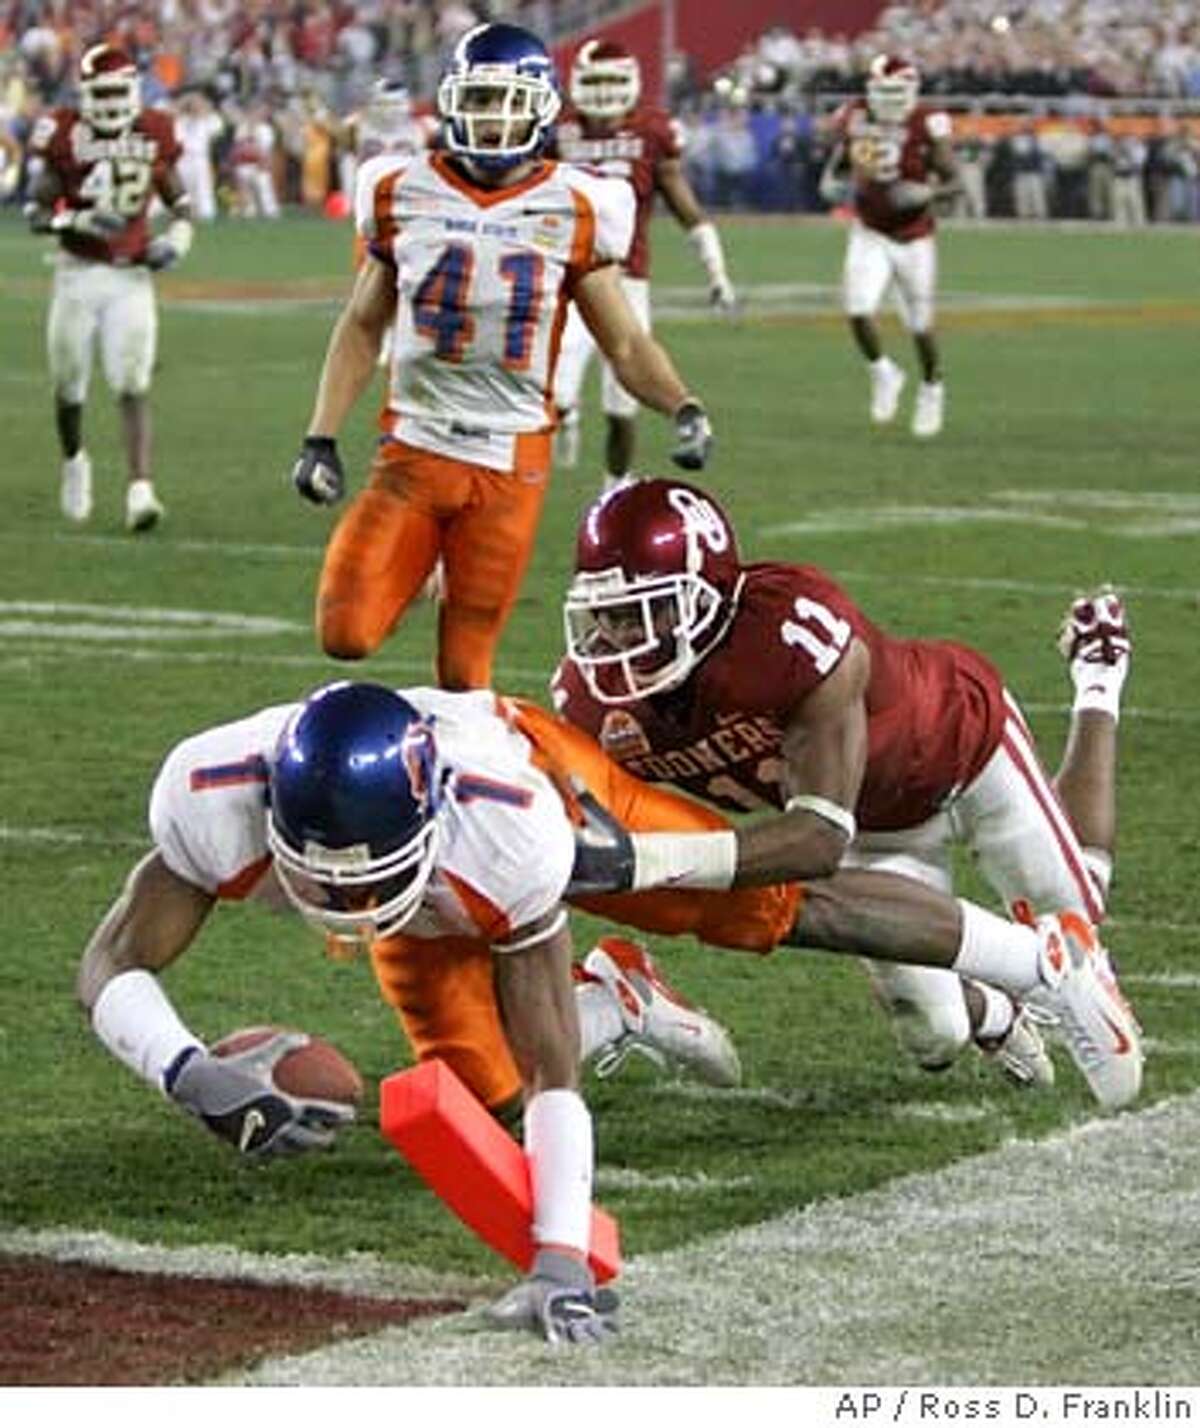 Boise State's Jerard Rabb (1) dives for a touchdown ahead of Oklahoma's Lendy Holmes (11) during the fourth quarter of the Fiesta Bowl college football game, Monday, Jan. 1, 2007, in Glendale, Ariz. (AP Photo/Ross D. Franklin)